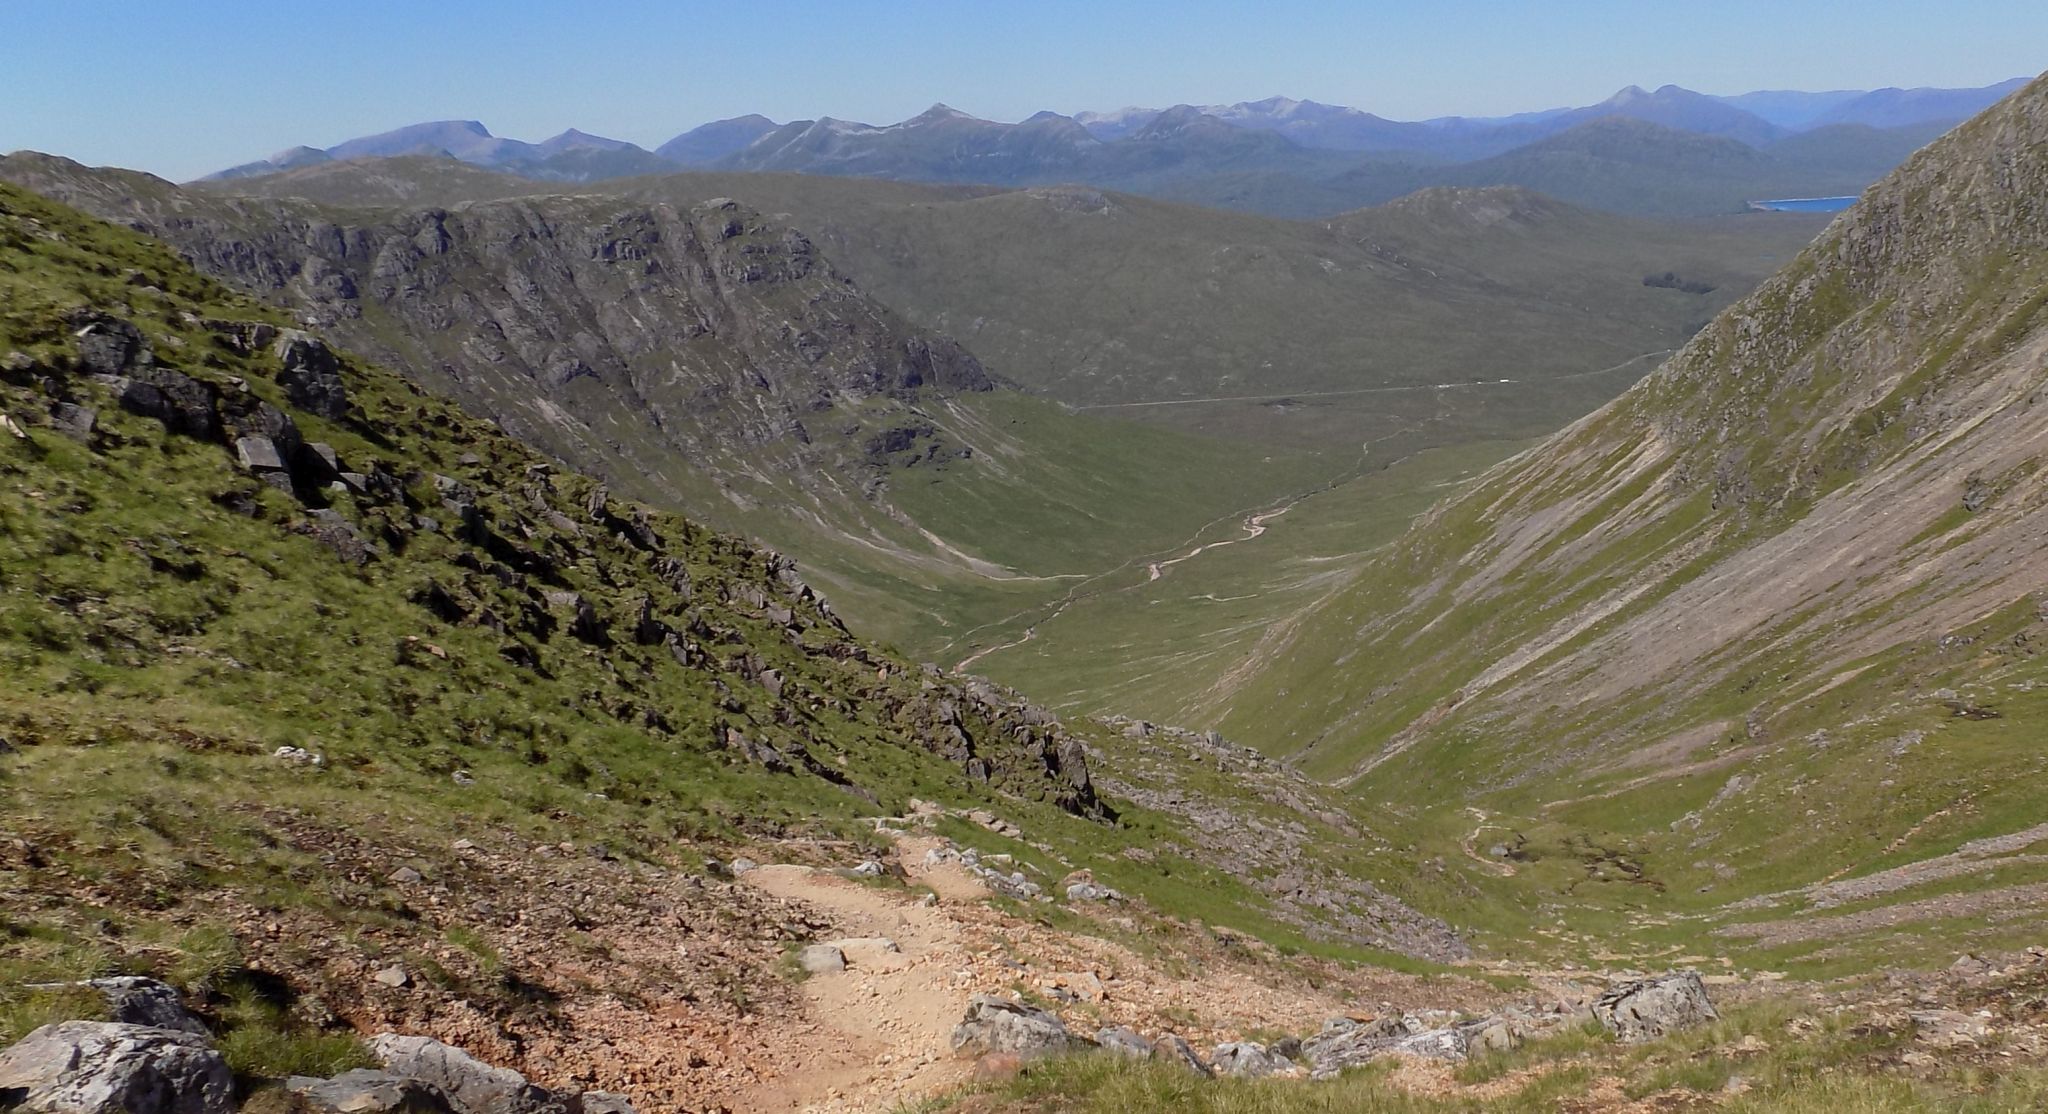 Descent route from Stob na Broige to the Lairig Gartain